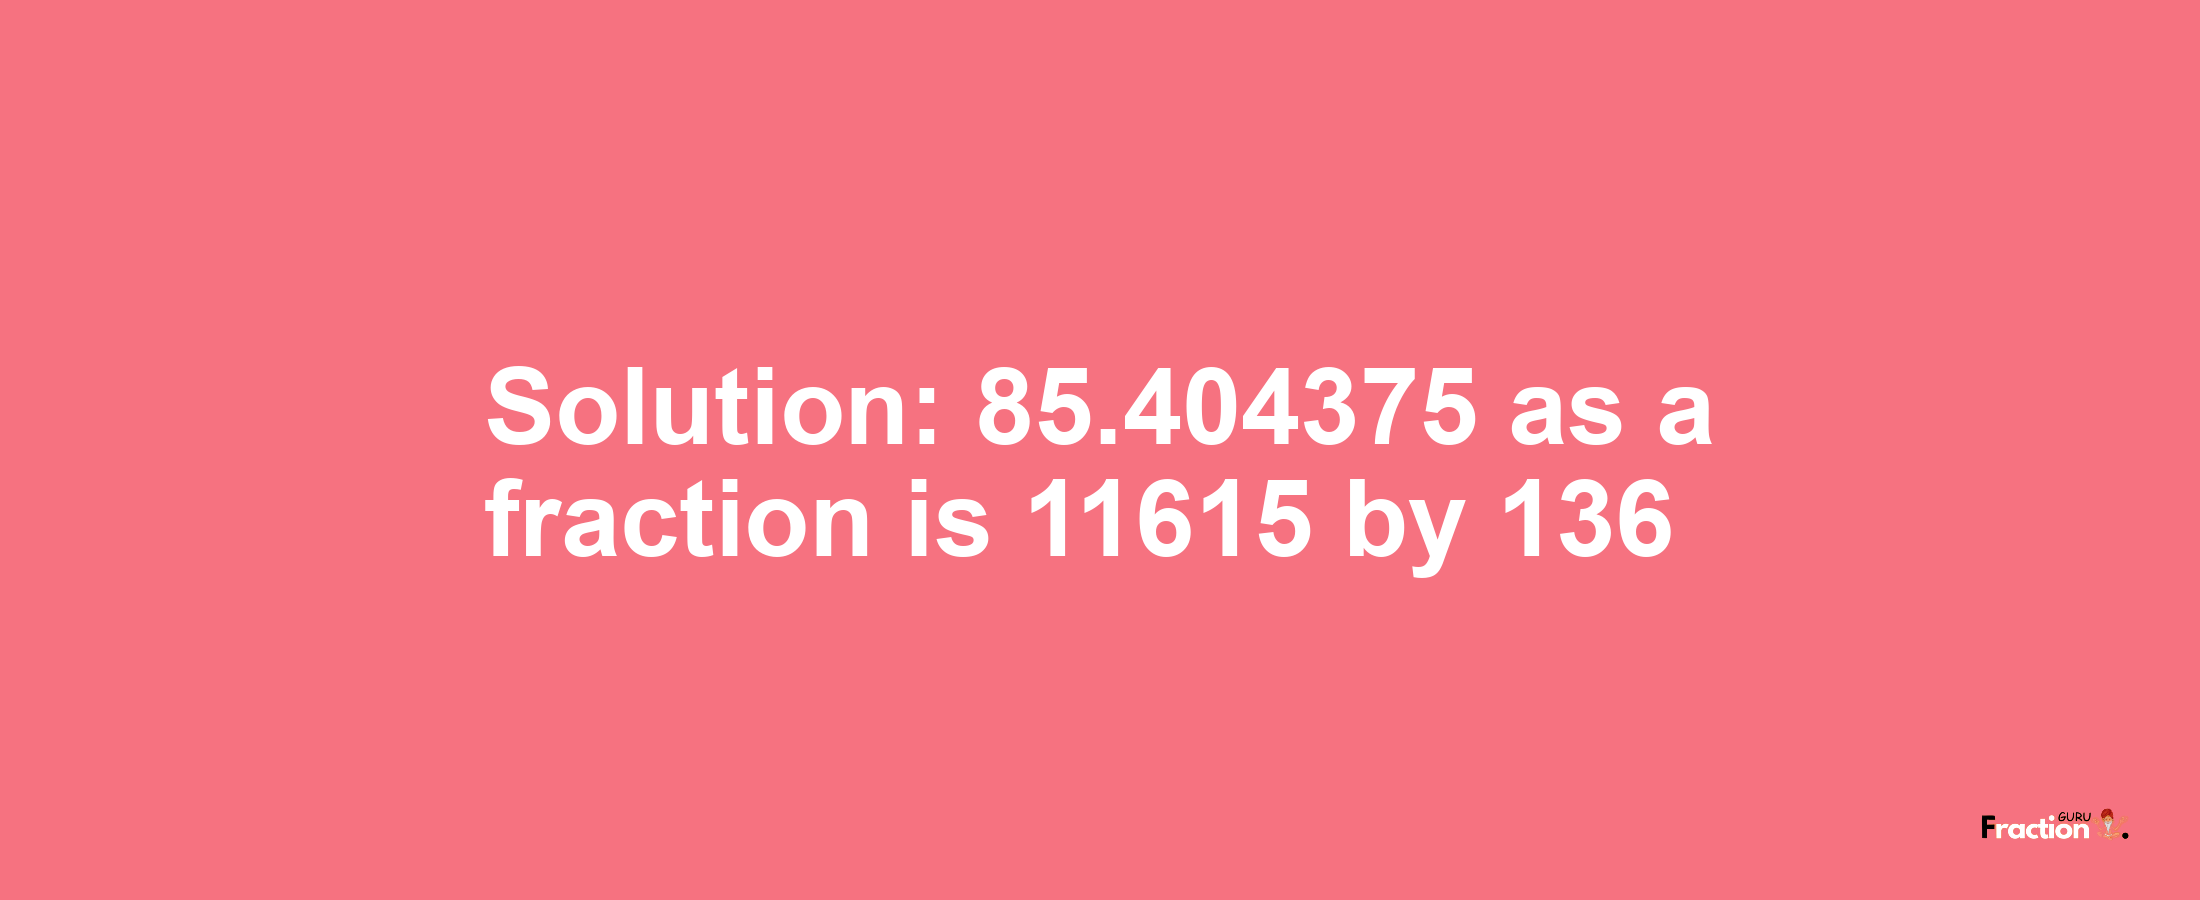 Solution:85.404375 as a fraction is 11615/136